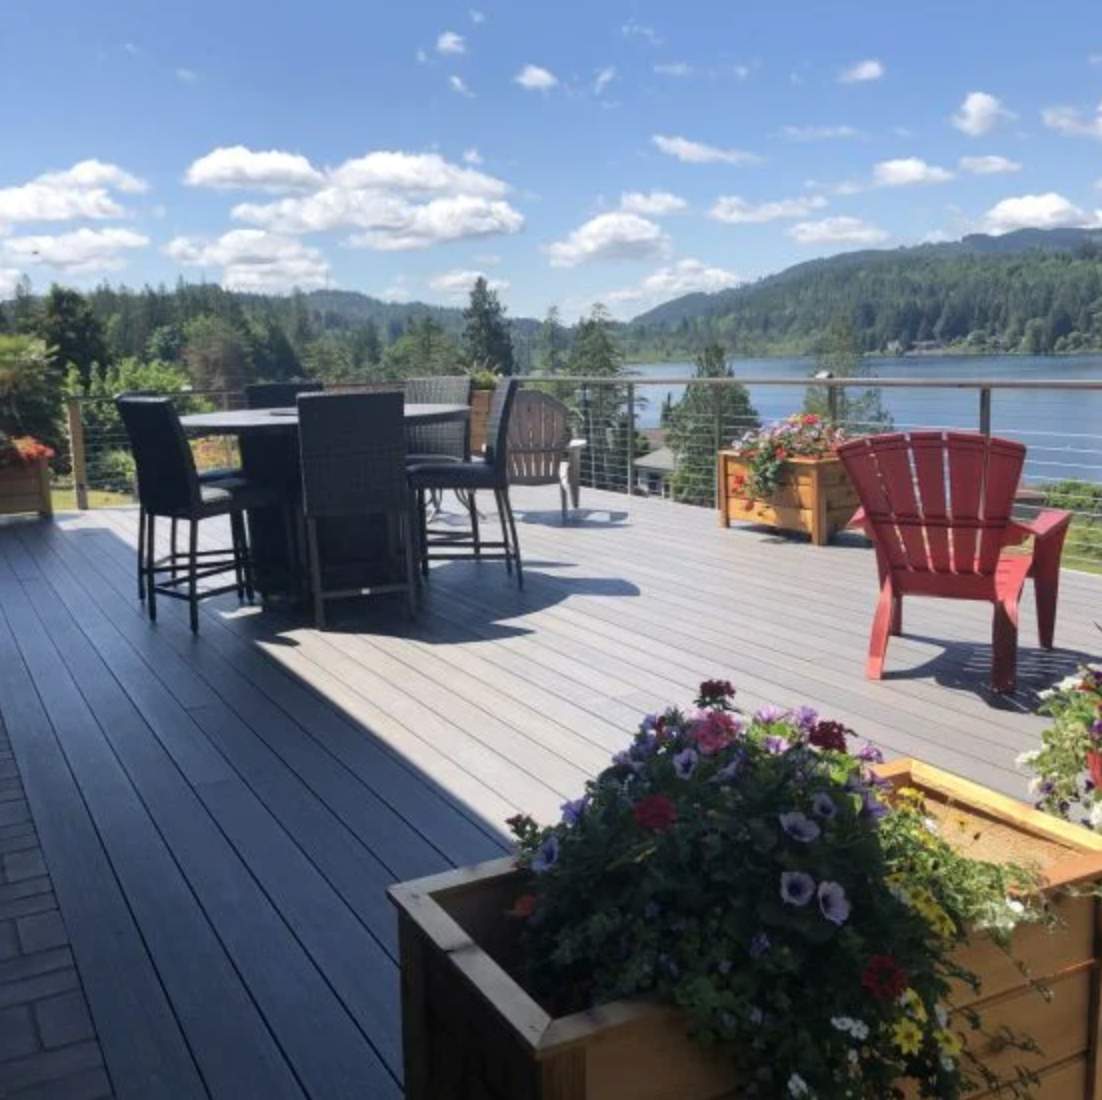 The Best Composite Decking Brands 2023: Shop Our Top Picks